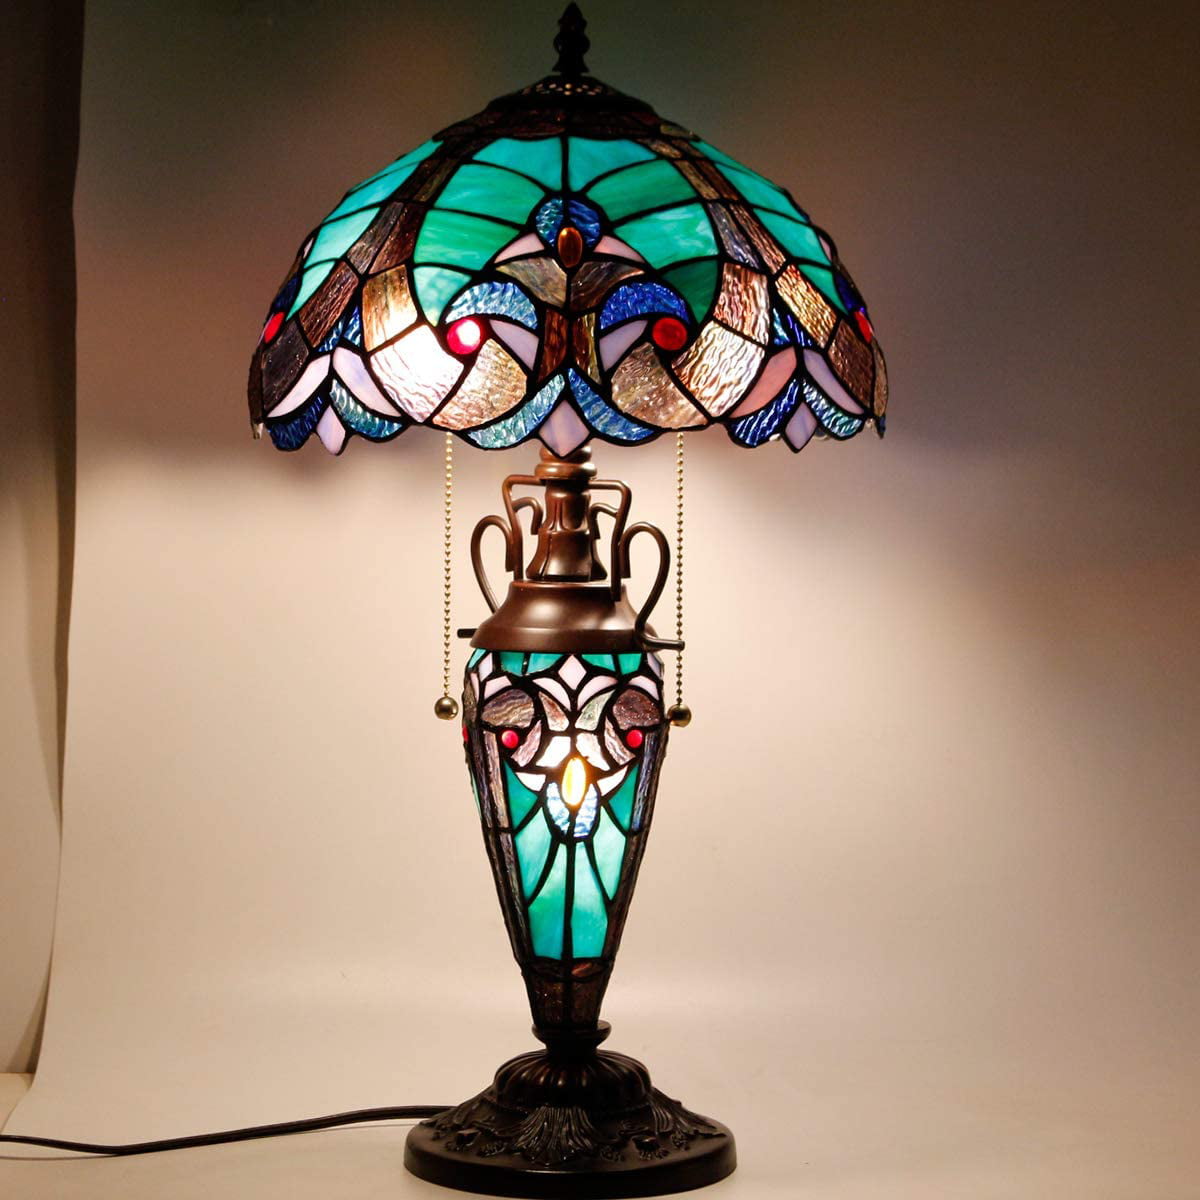 GEDUBIUBOO  Style Table Lamp Green Stained Glass Liaison Lamp 12X12X22 Inches Mother-Daughter Vase Desk Reading Light Decor Bedroom Living Room  Office S160G Series